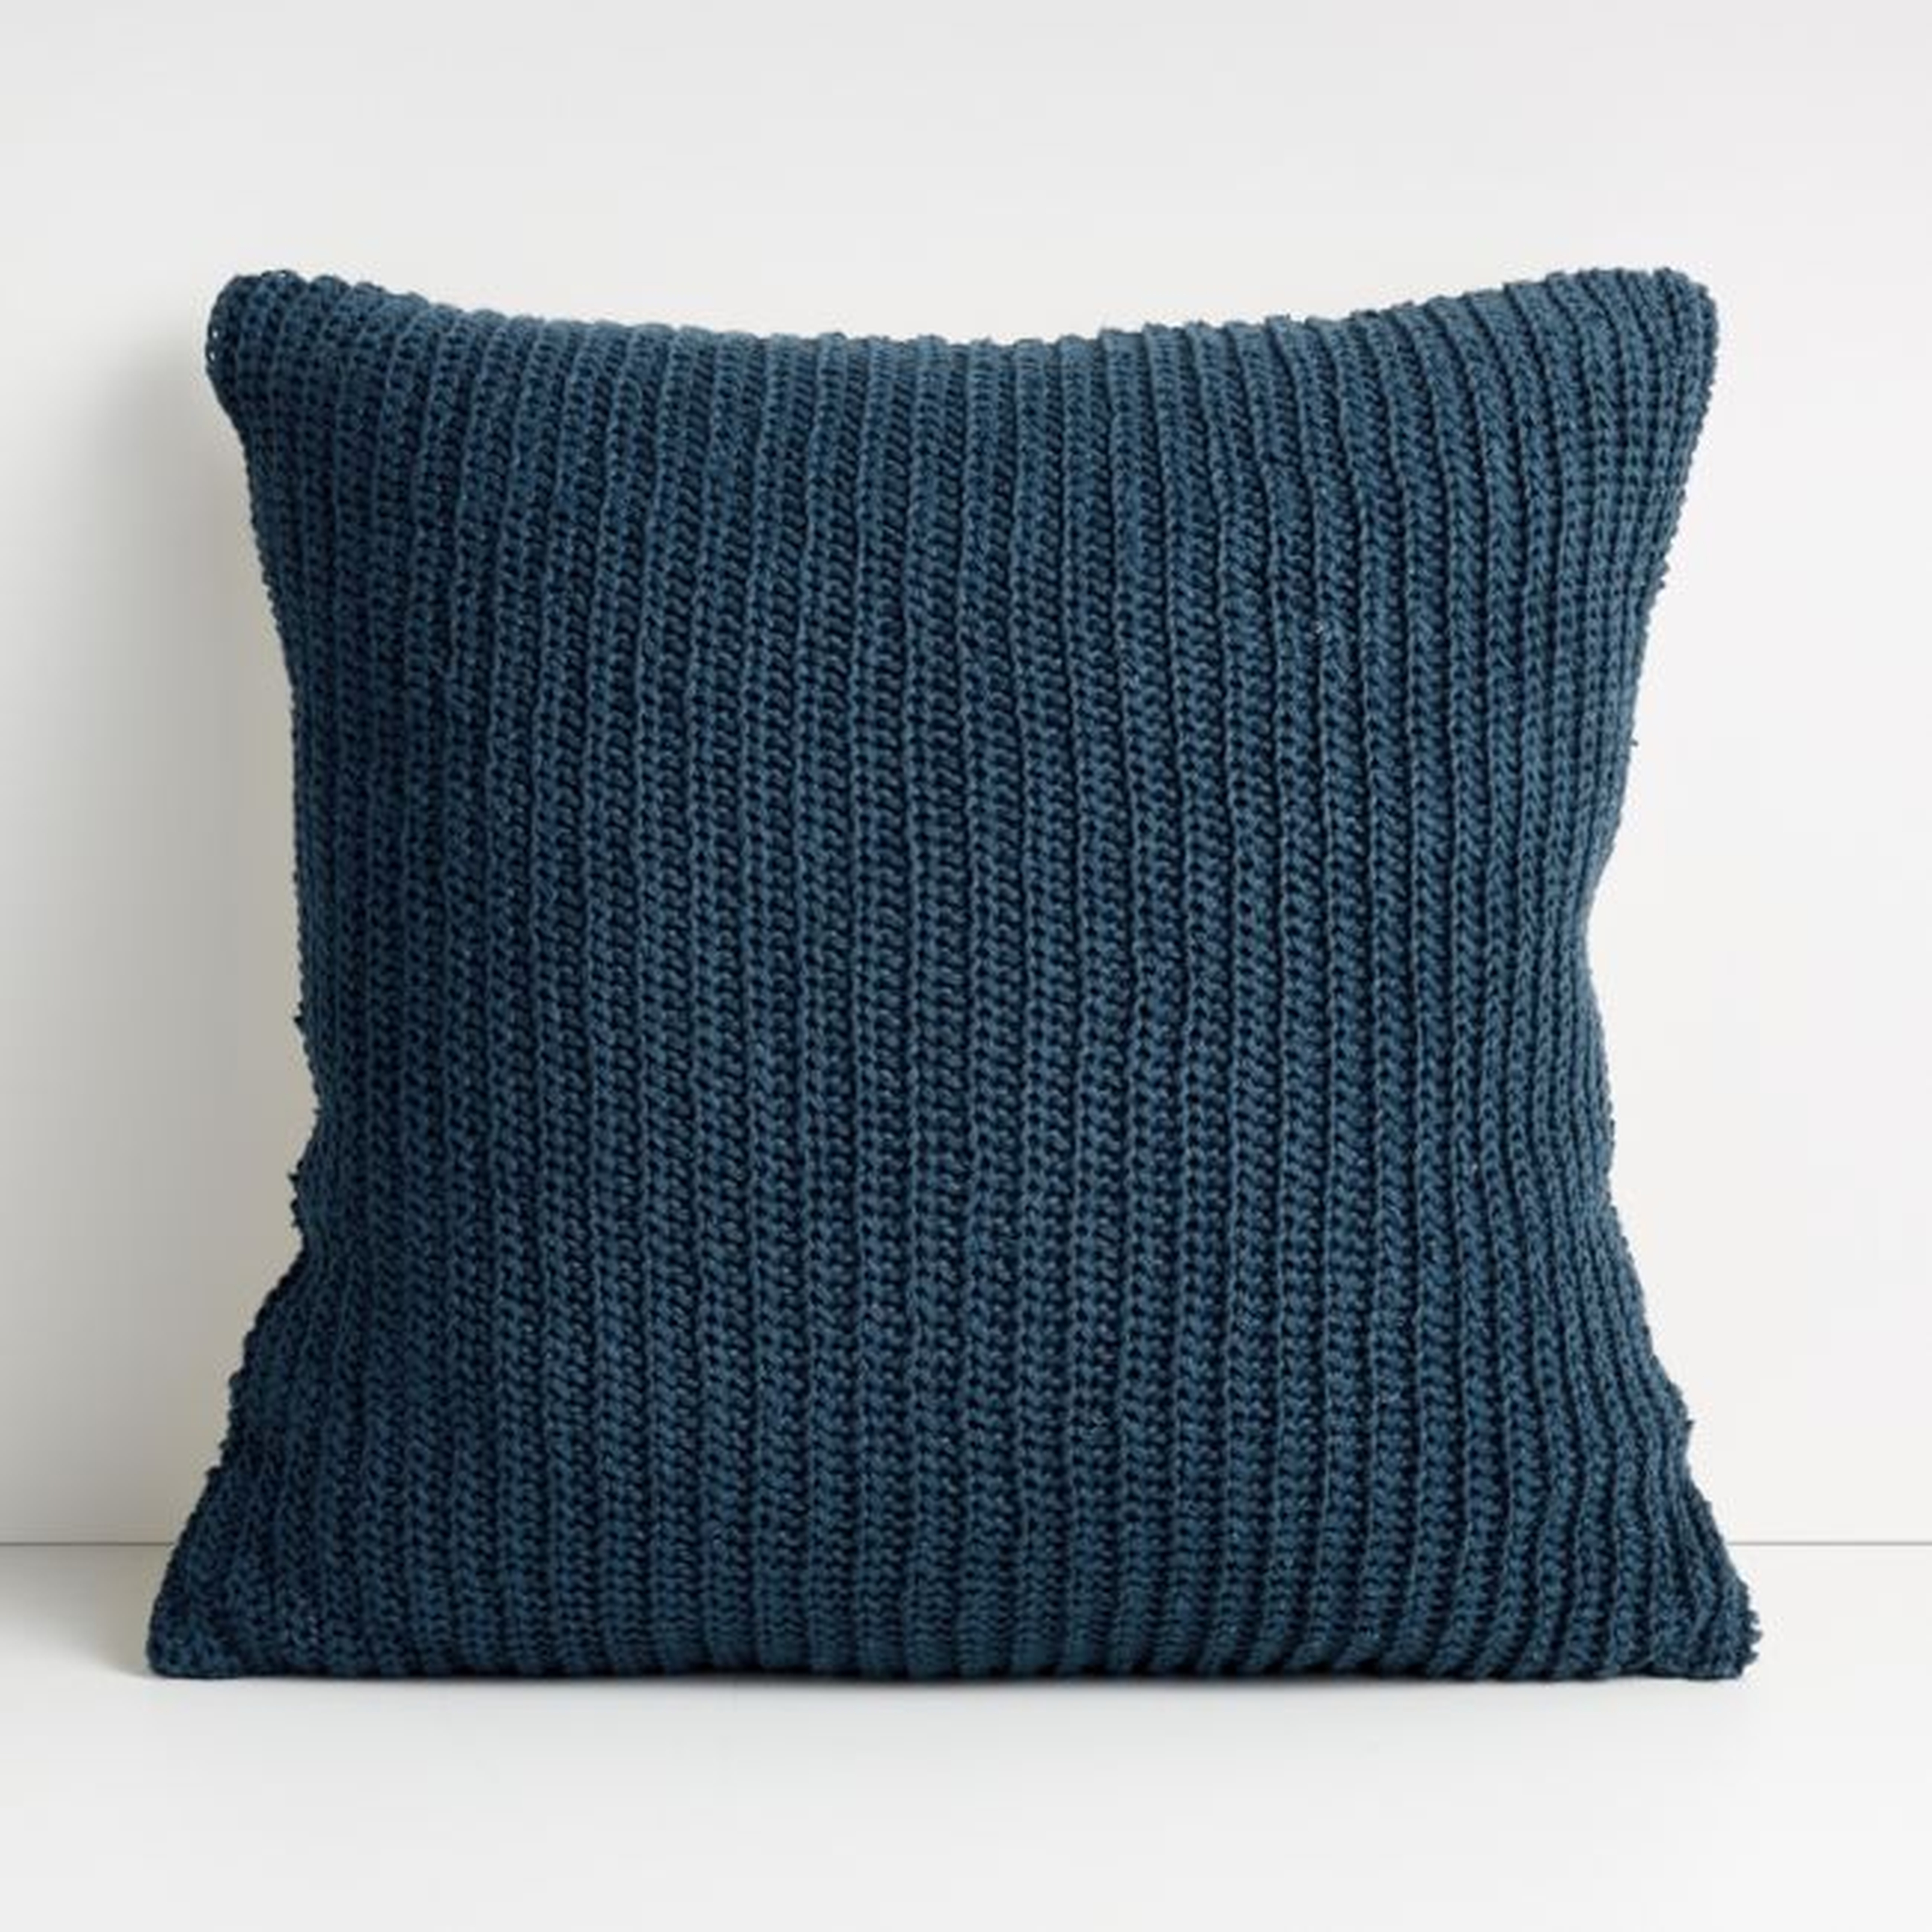 Croft 20" Insignia Blue Crochet Pillow with Feather-Down Insert - Crate and Barrel